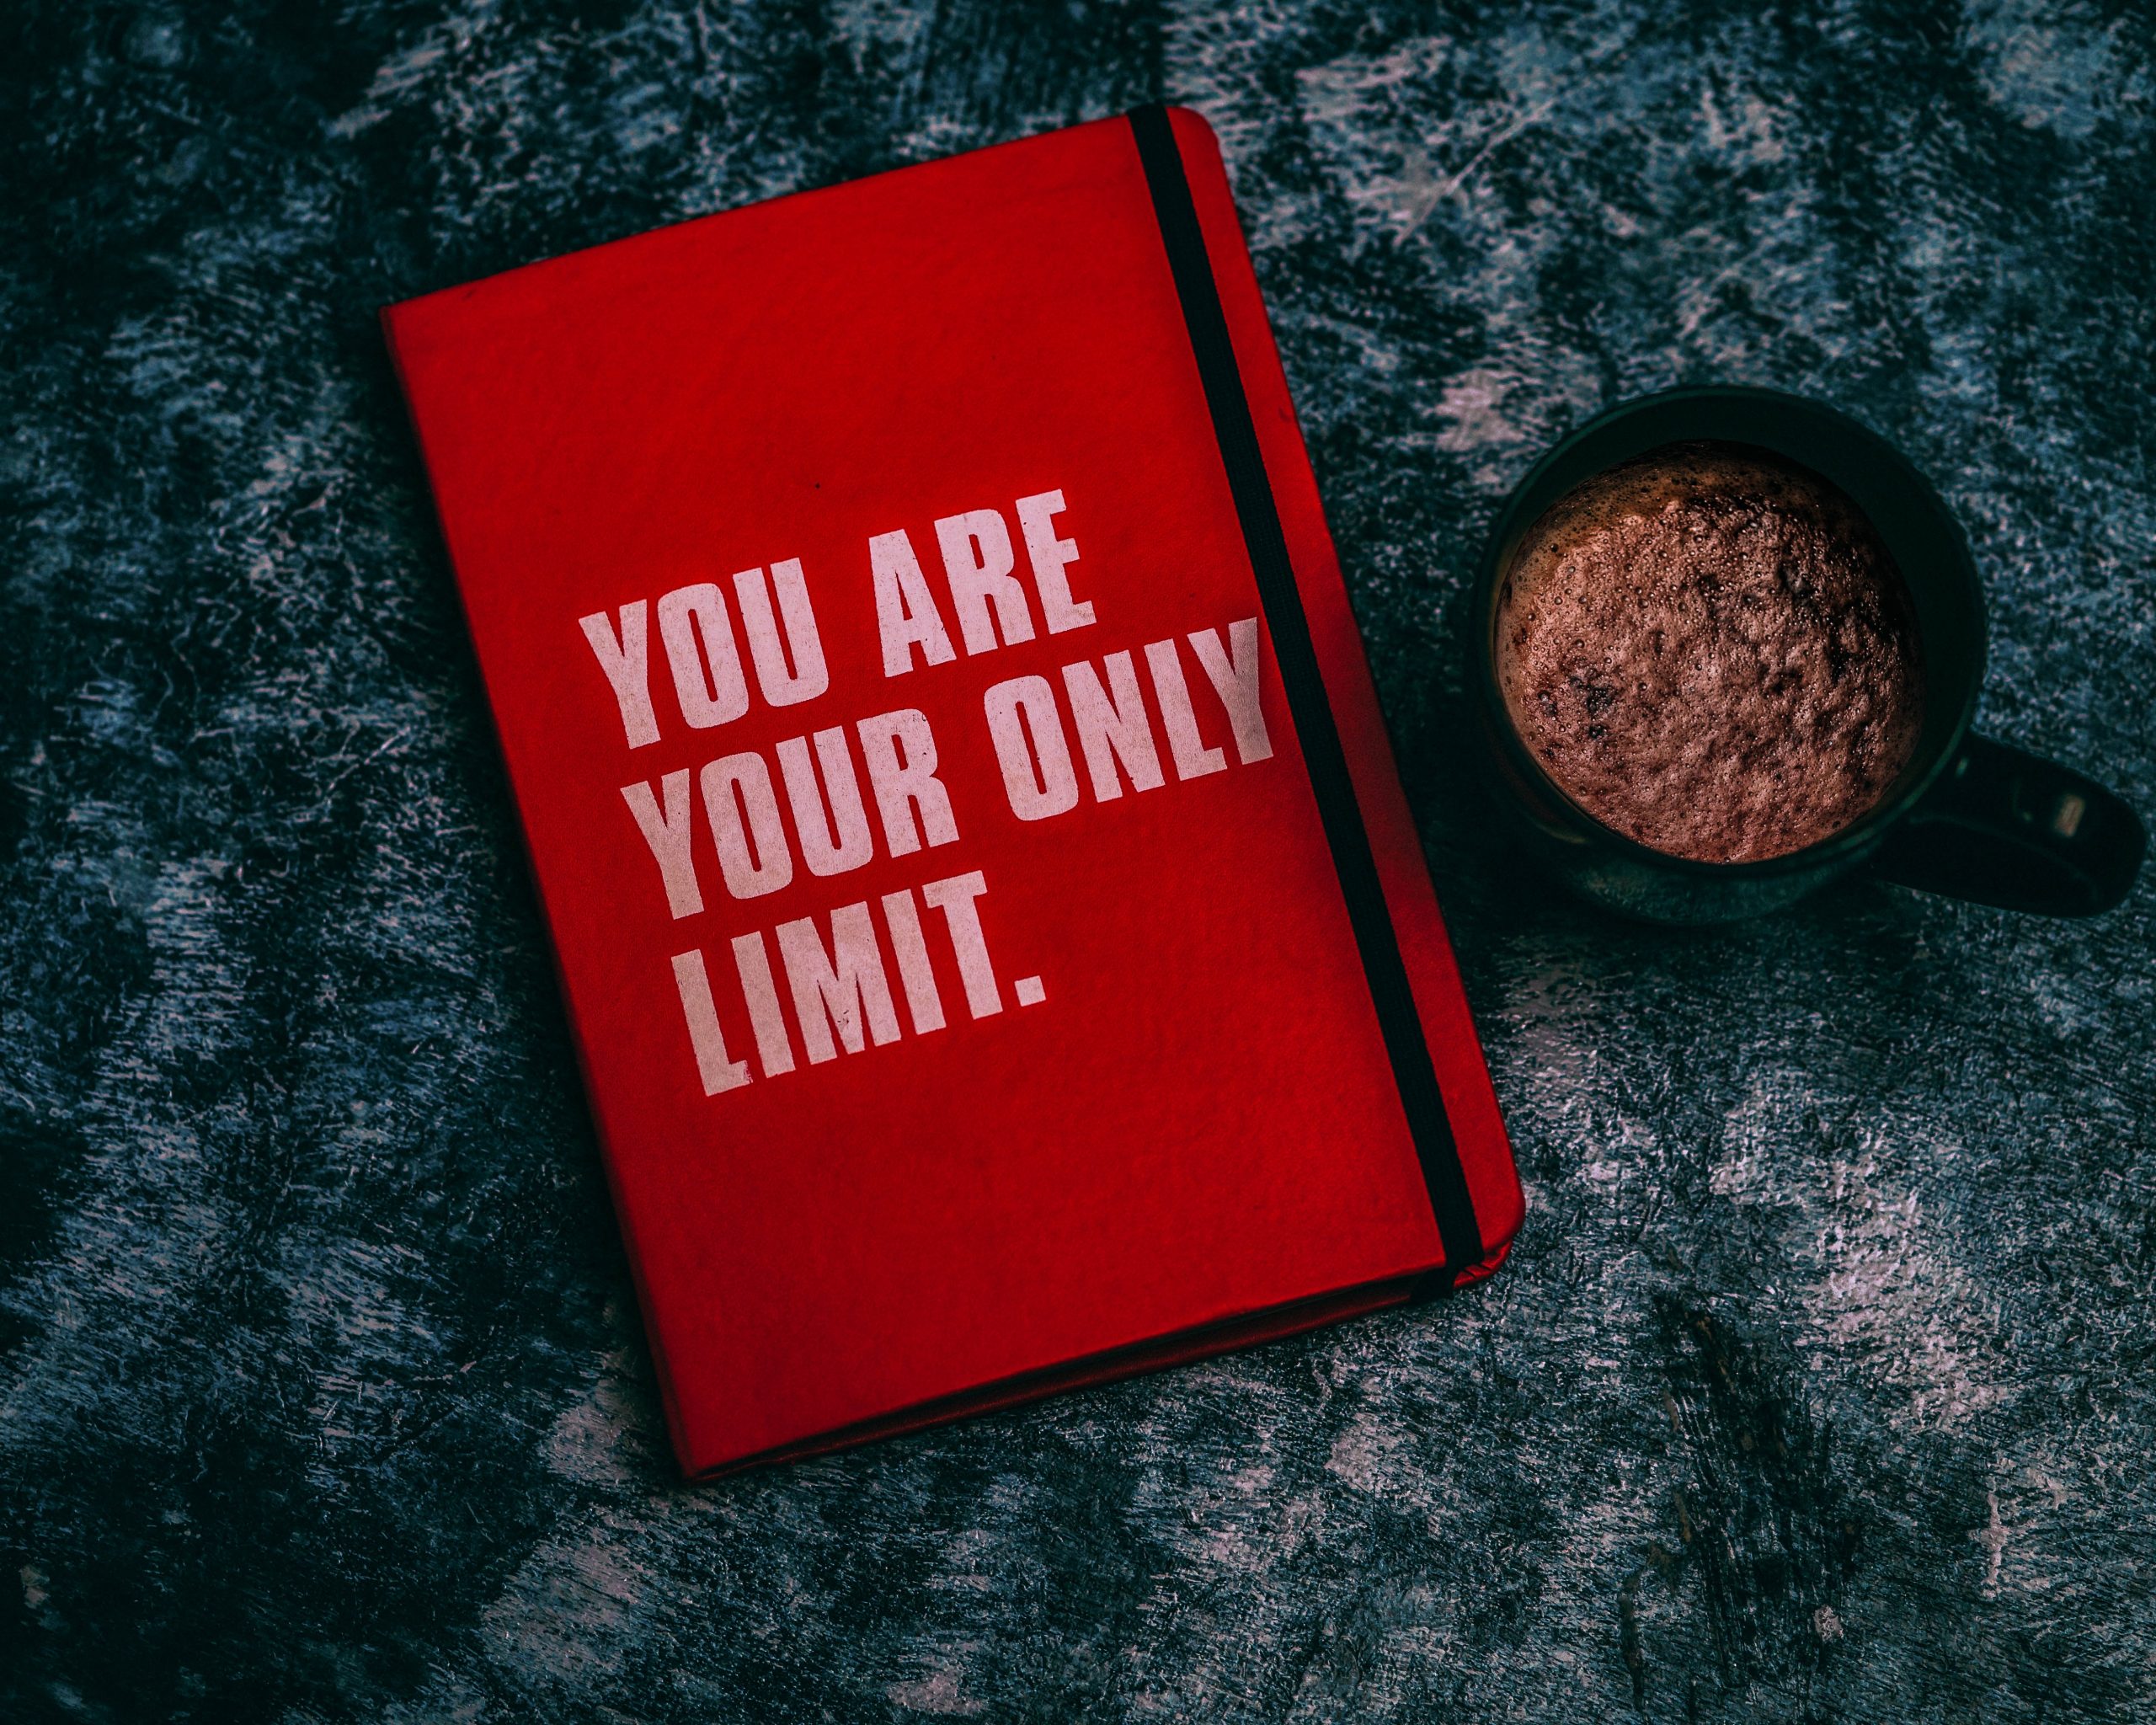 Picture of a book that says, "You are your only limit."